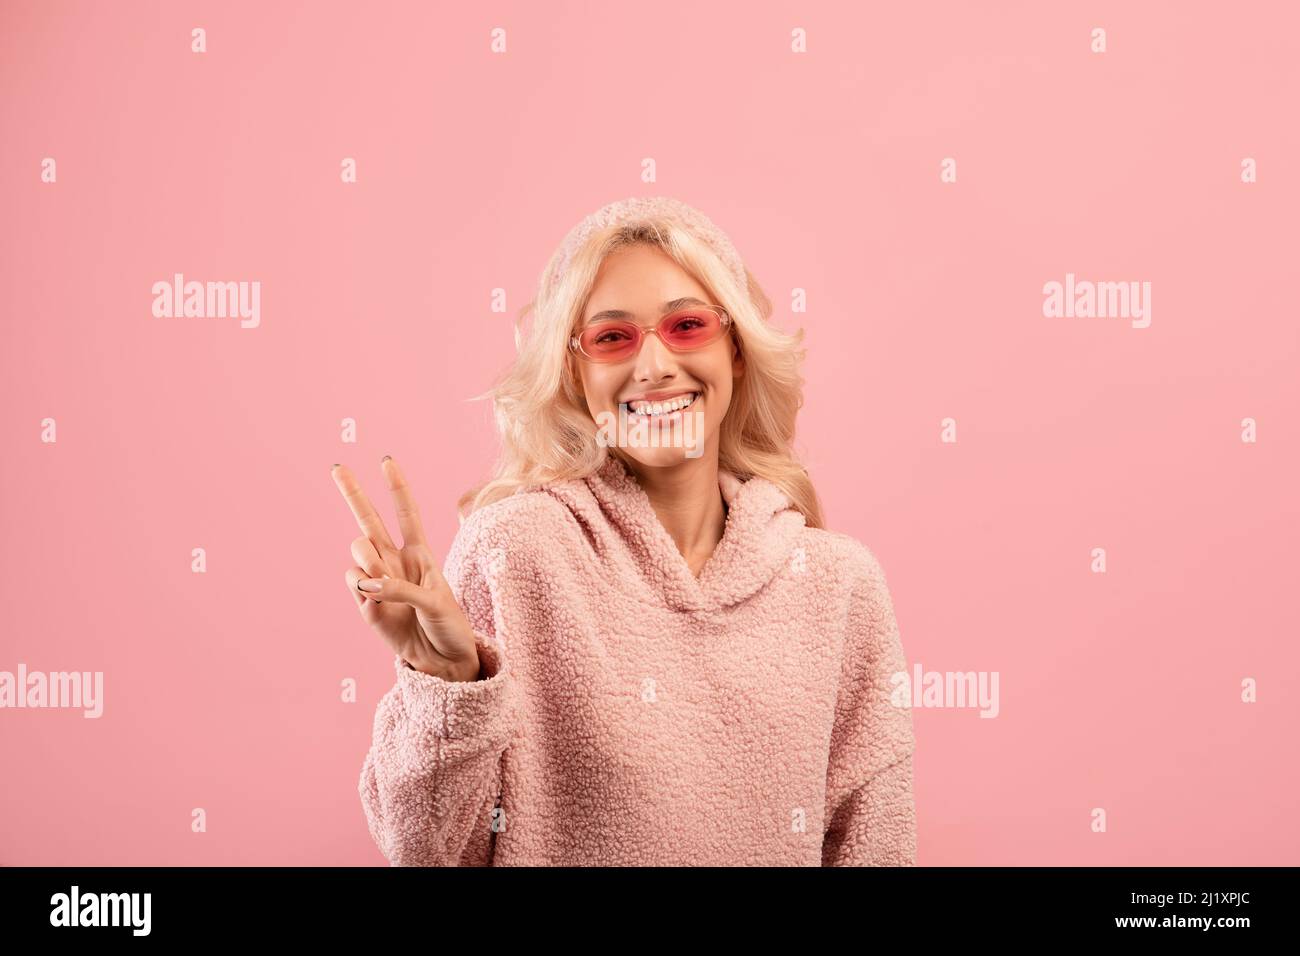 Good mood. Happy stylish lady showing victory v sign and smiling at camera, wearing colorful sunglasses Stock Photo